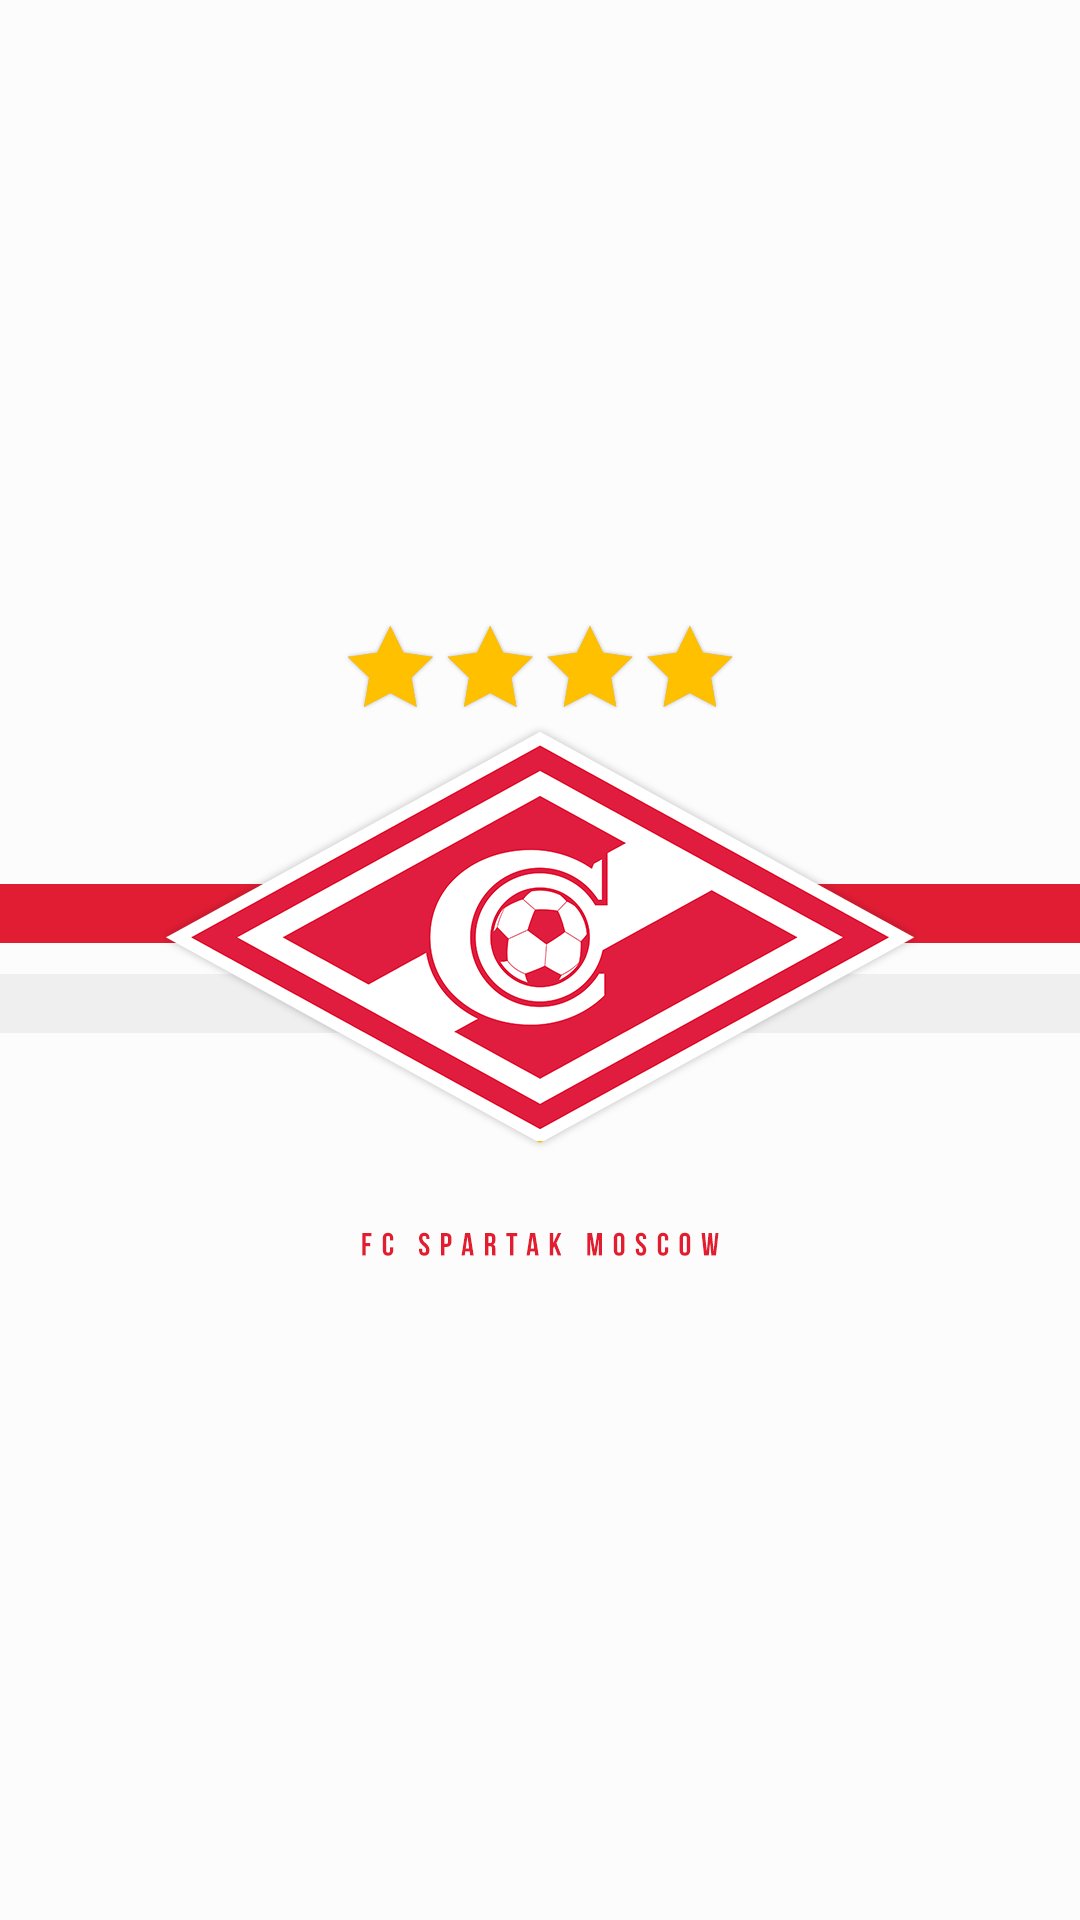 Logo Of Fc Spartak Moscow Coloring Pages - Richard McNary's Coloring Pages